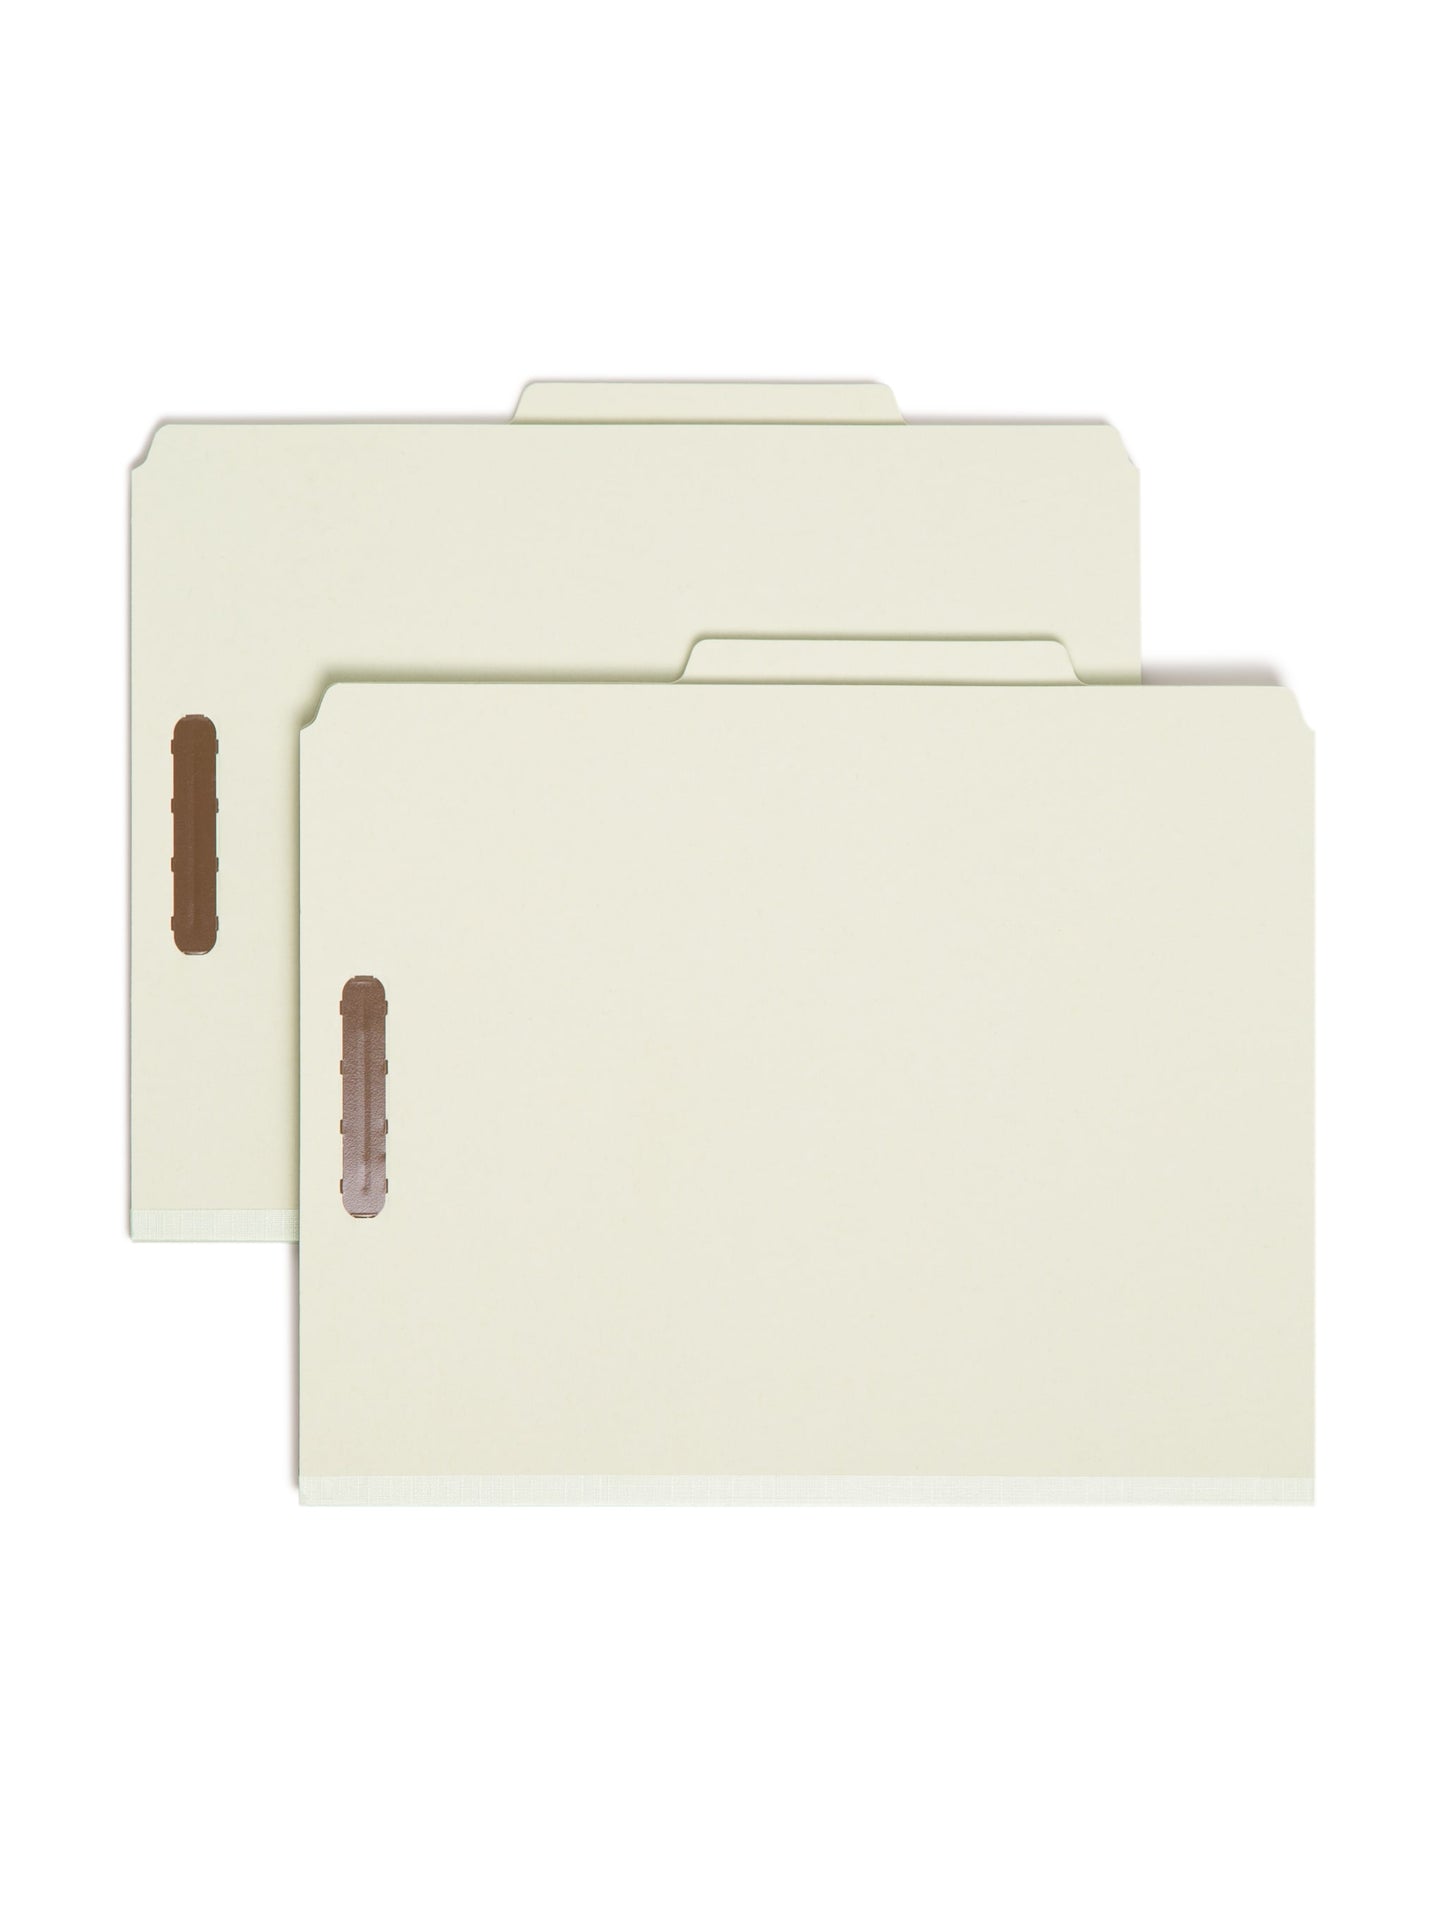 Pressboard Classification File Folders, 2 Dividers, 2 inch Expansion, Gray/Green Color, Letter Size, Set of 0, 30086486140233